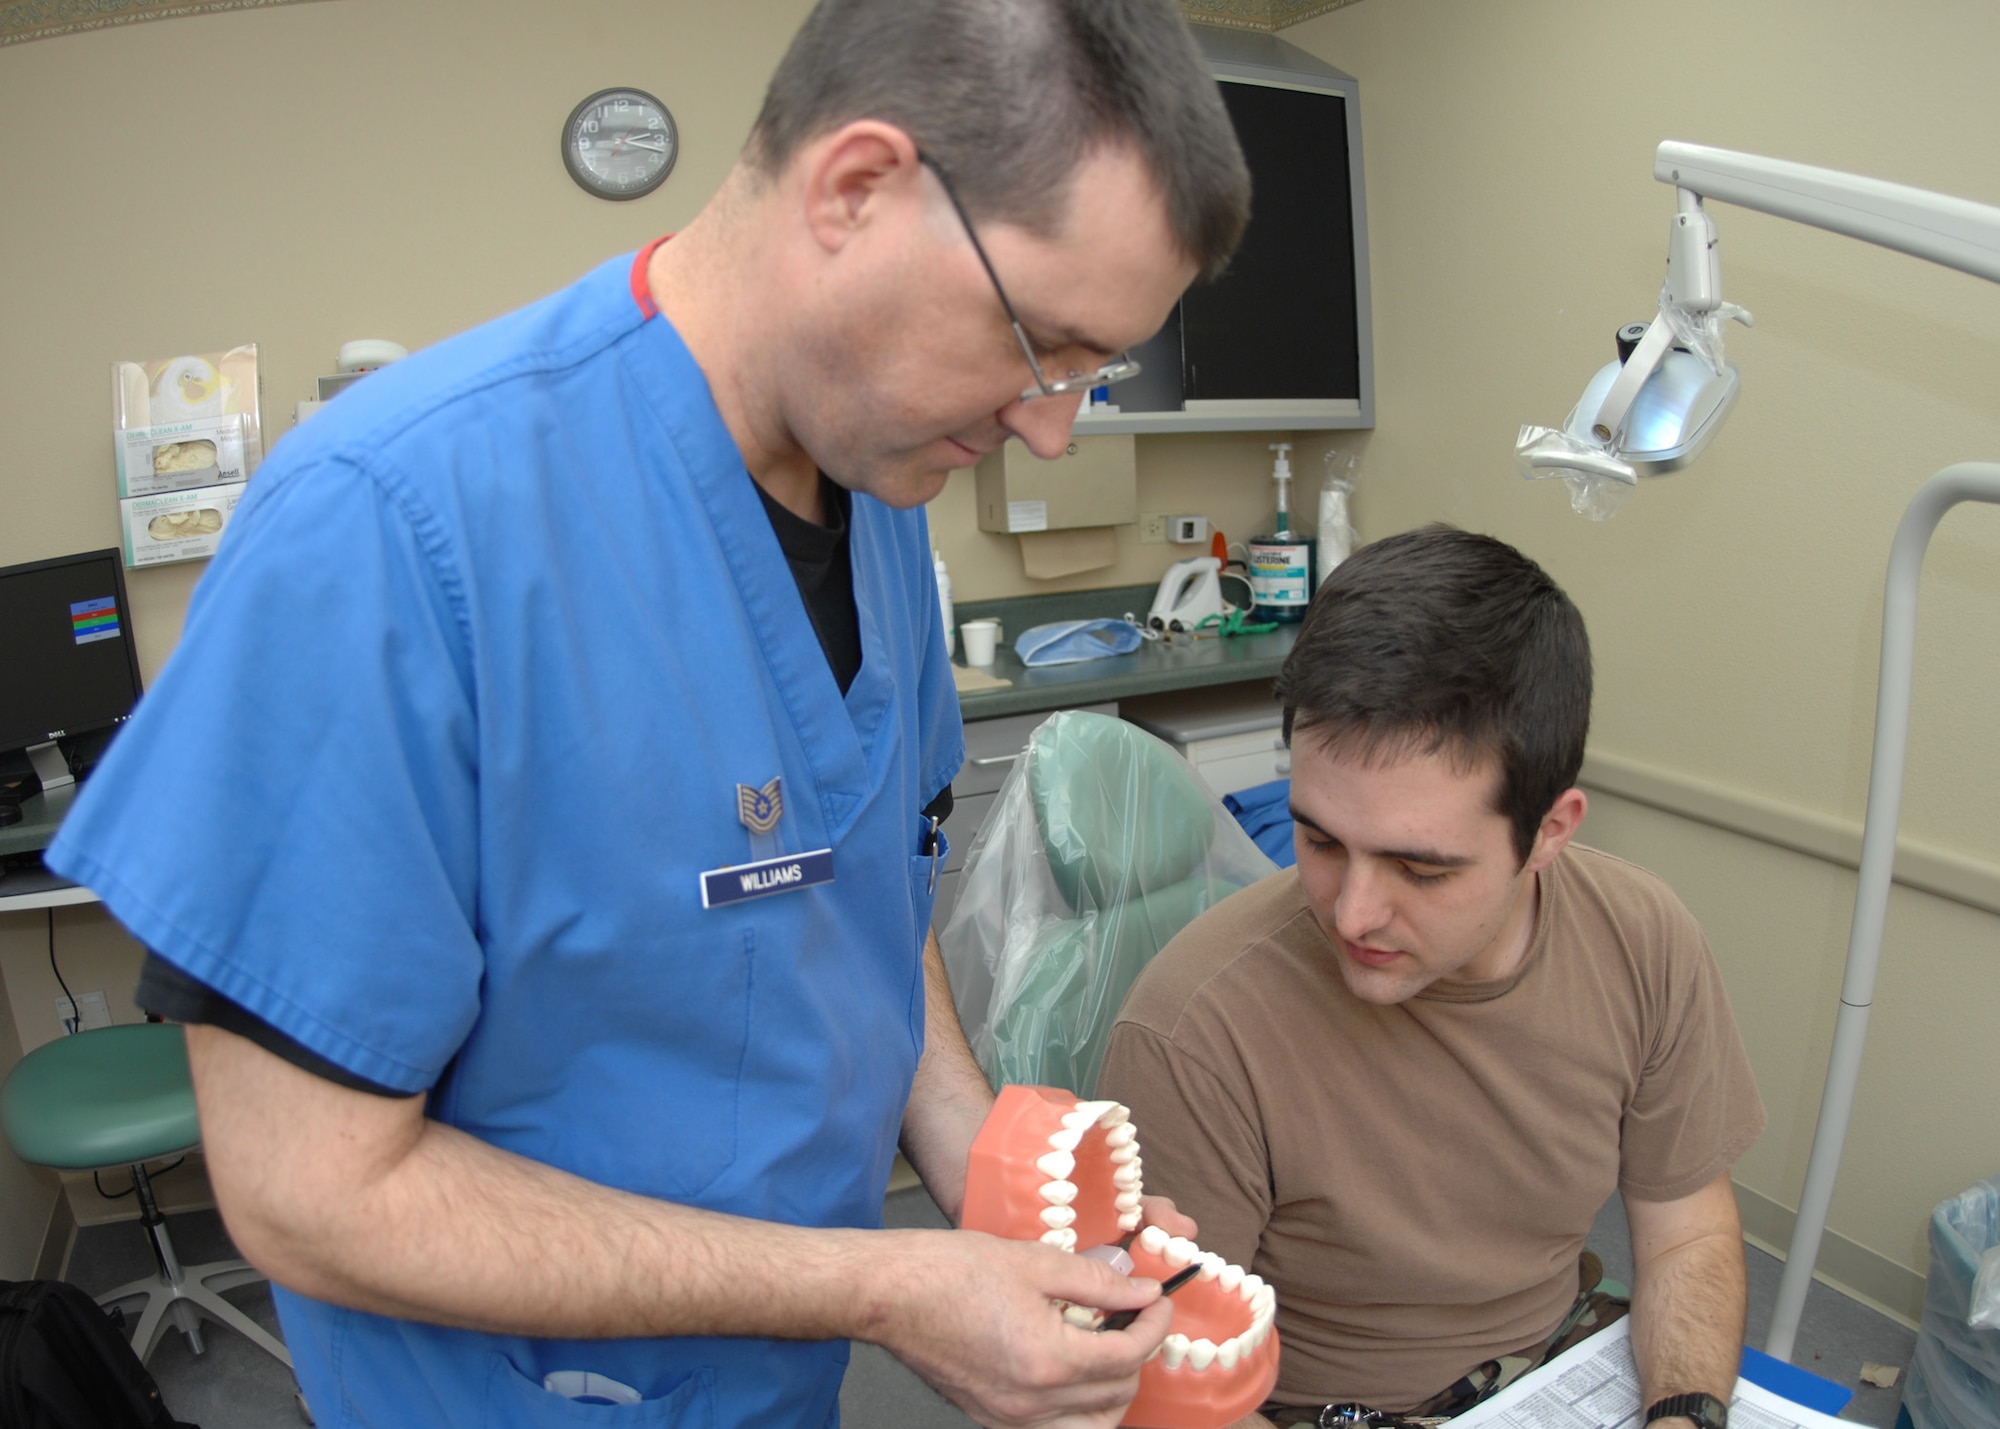 DYESS AIR FORCE BASE, Texas -- Technical Sgt. Jack Williams goes over dental care with Airman 1st Class Ben Hayes Feb. 5. (U.S. Air Force Photo by Airman 1st Class Jennifer Romig)